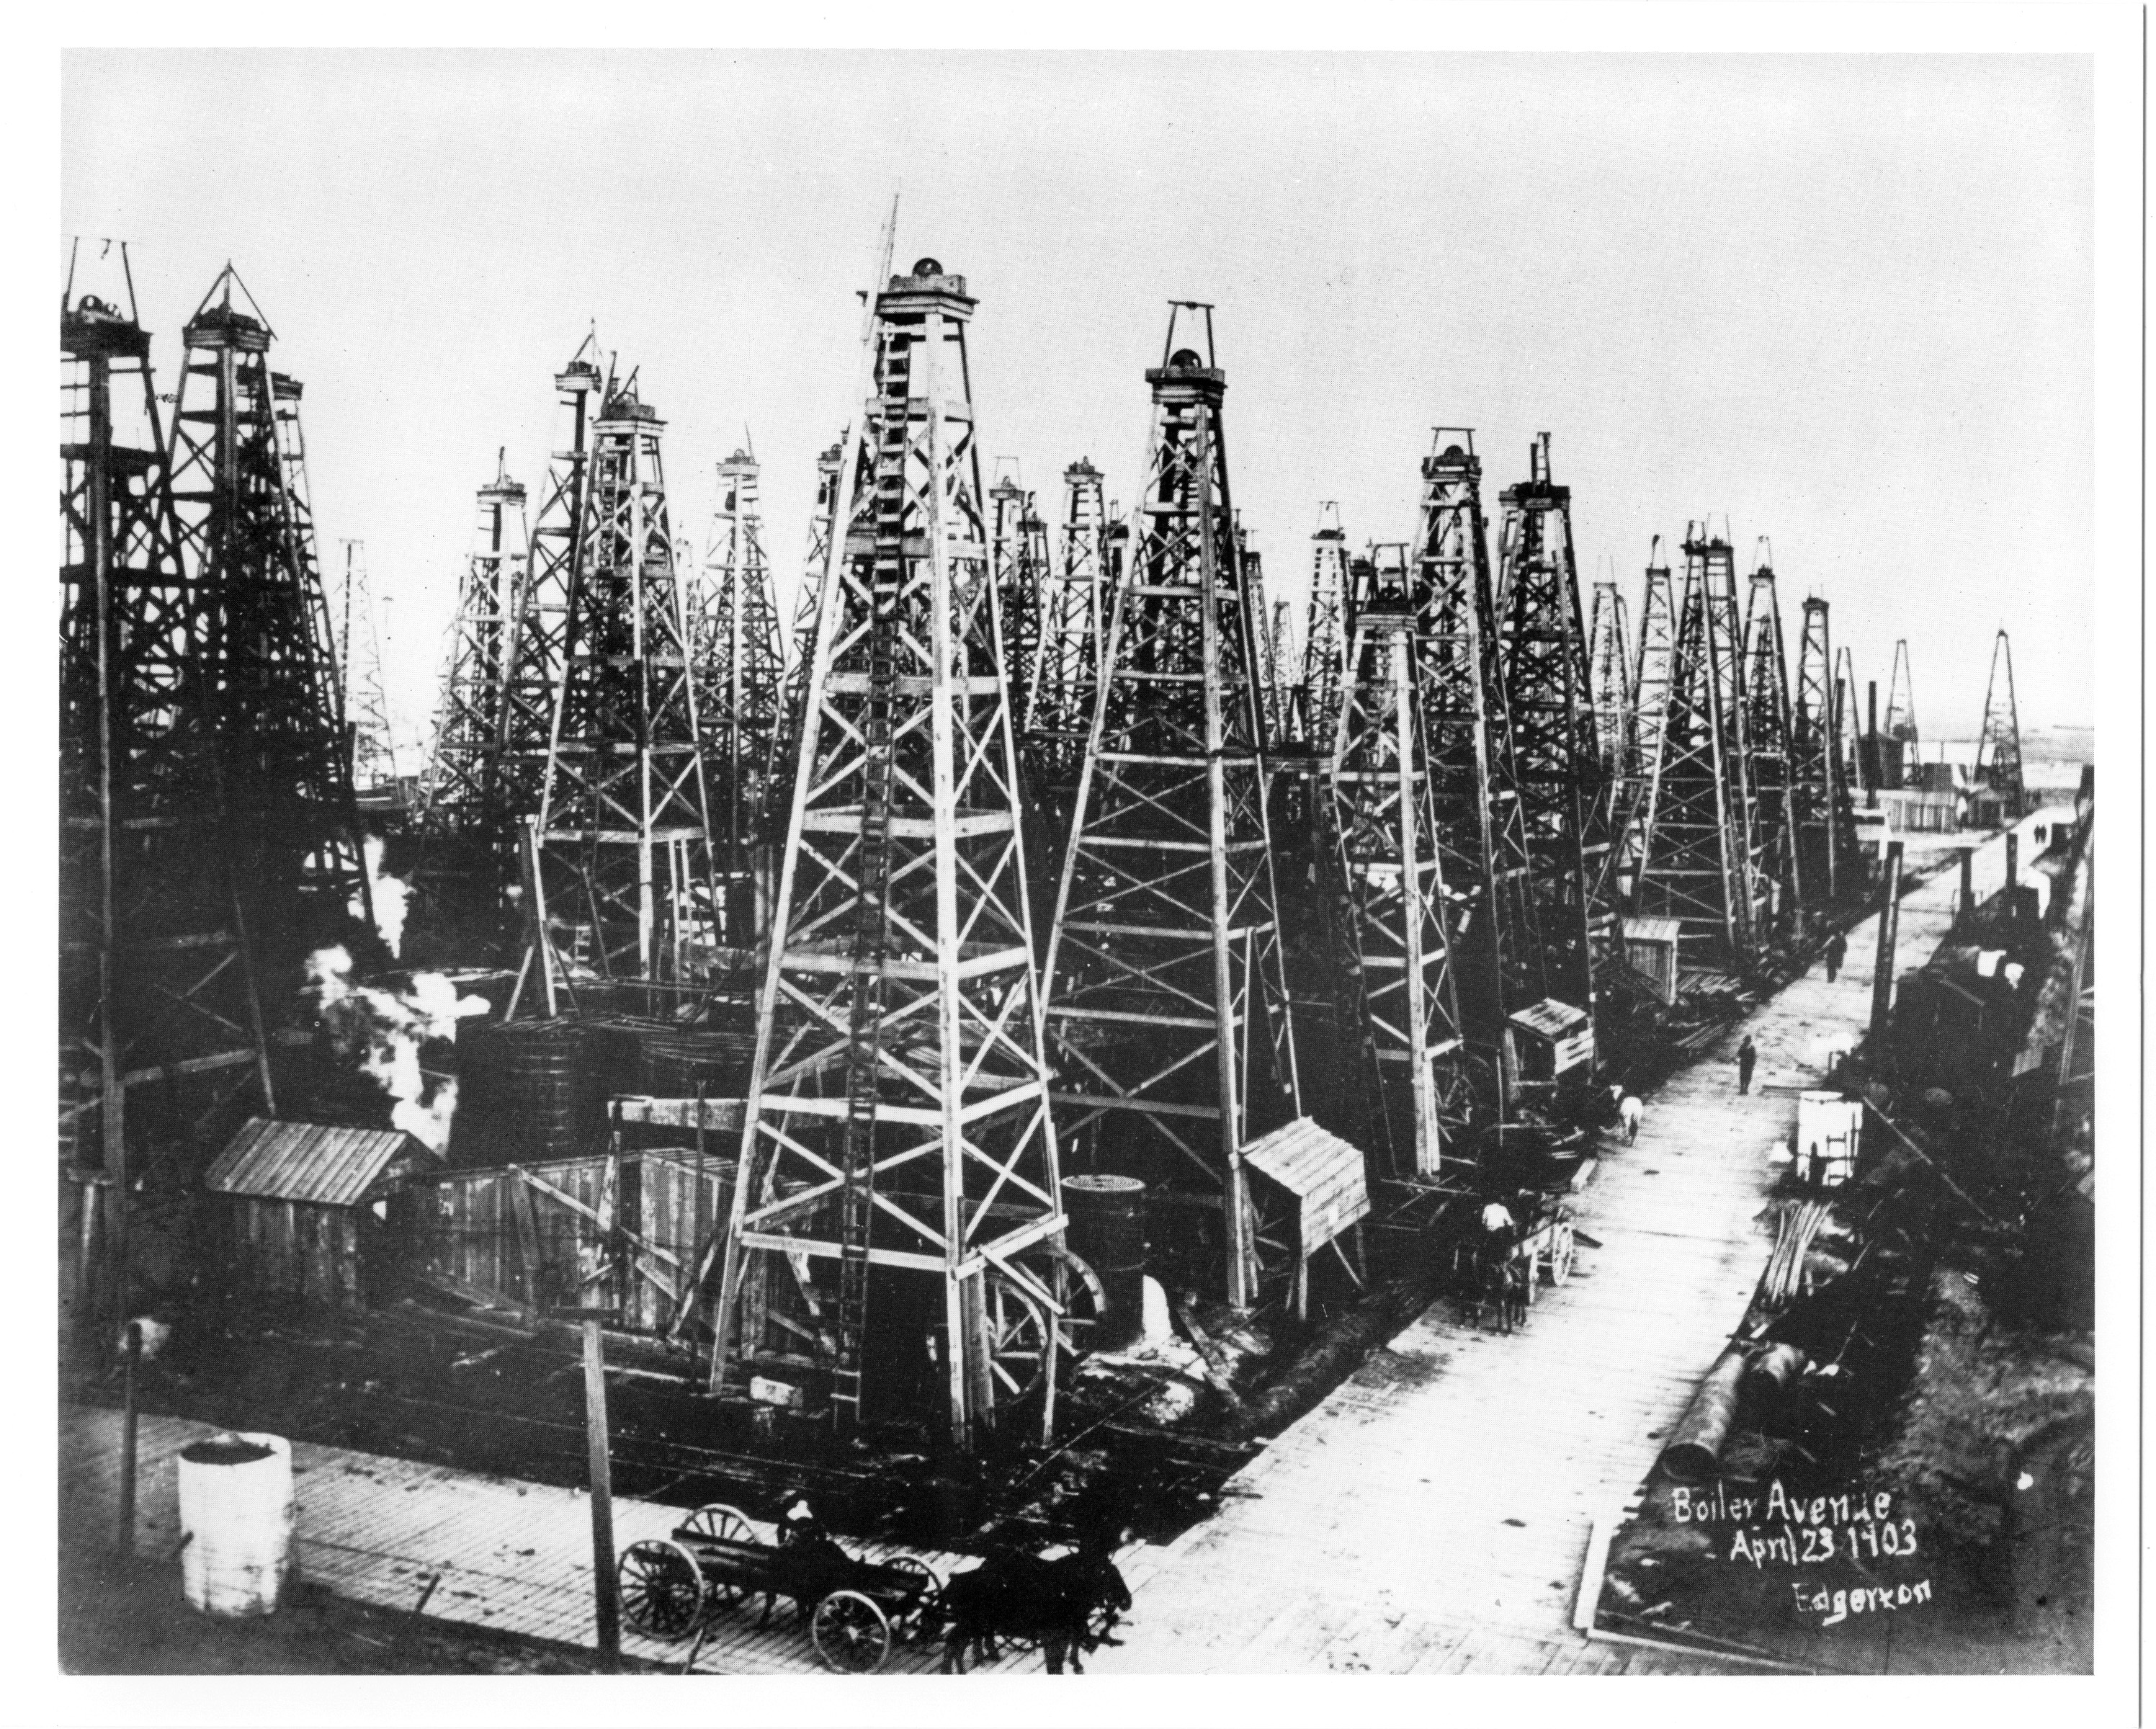 Spindletop during the boom